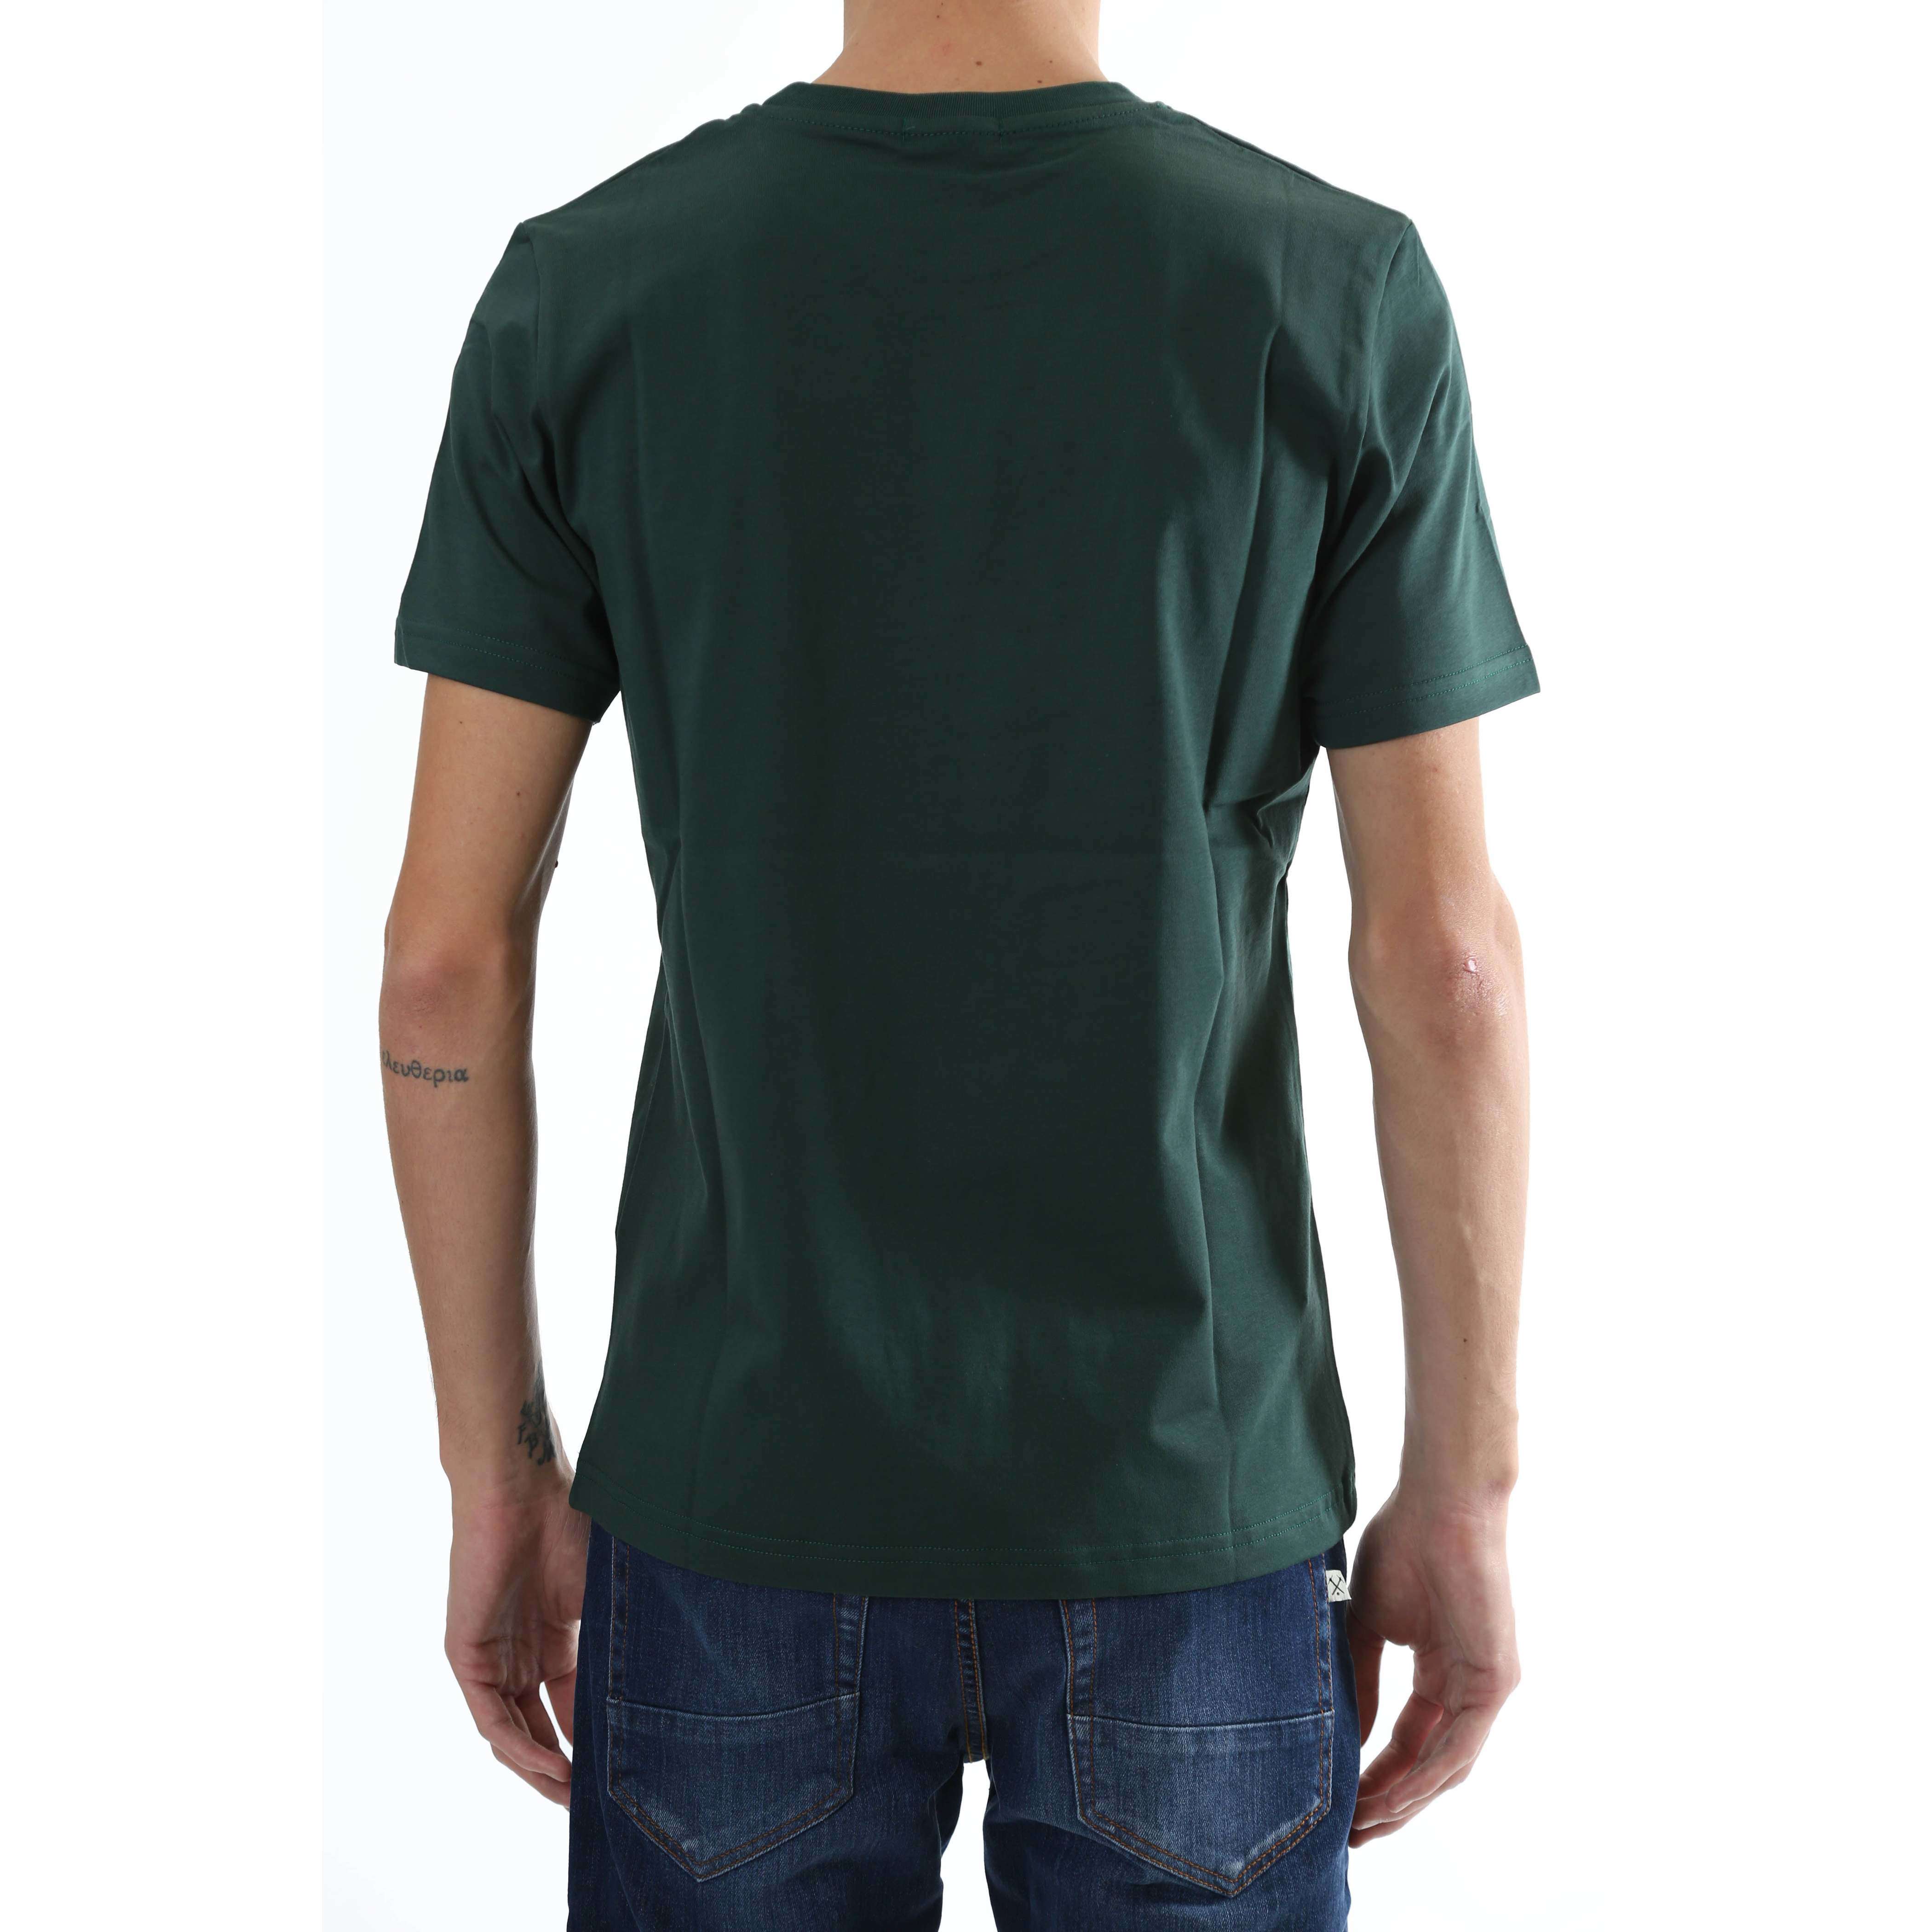 Gold Rush Uomo T-Shirt Stampa Forest Green